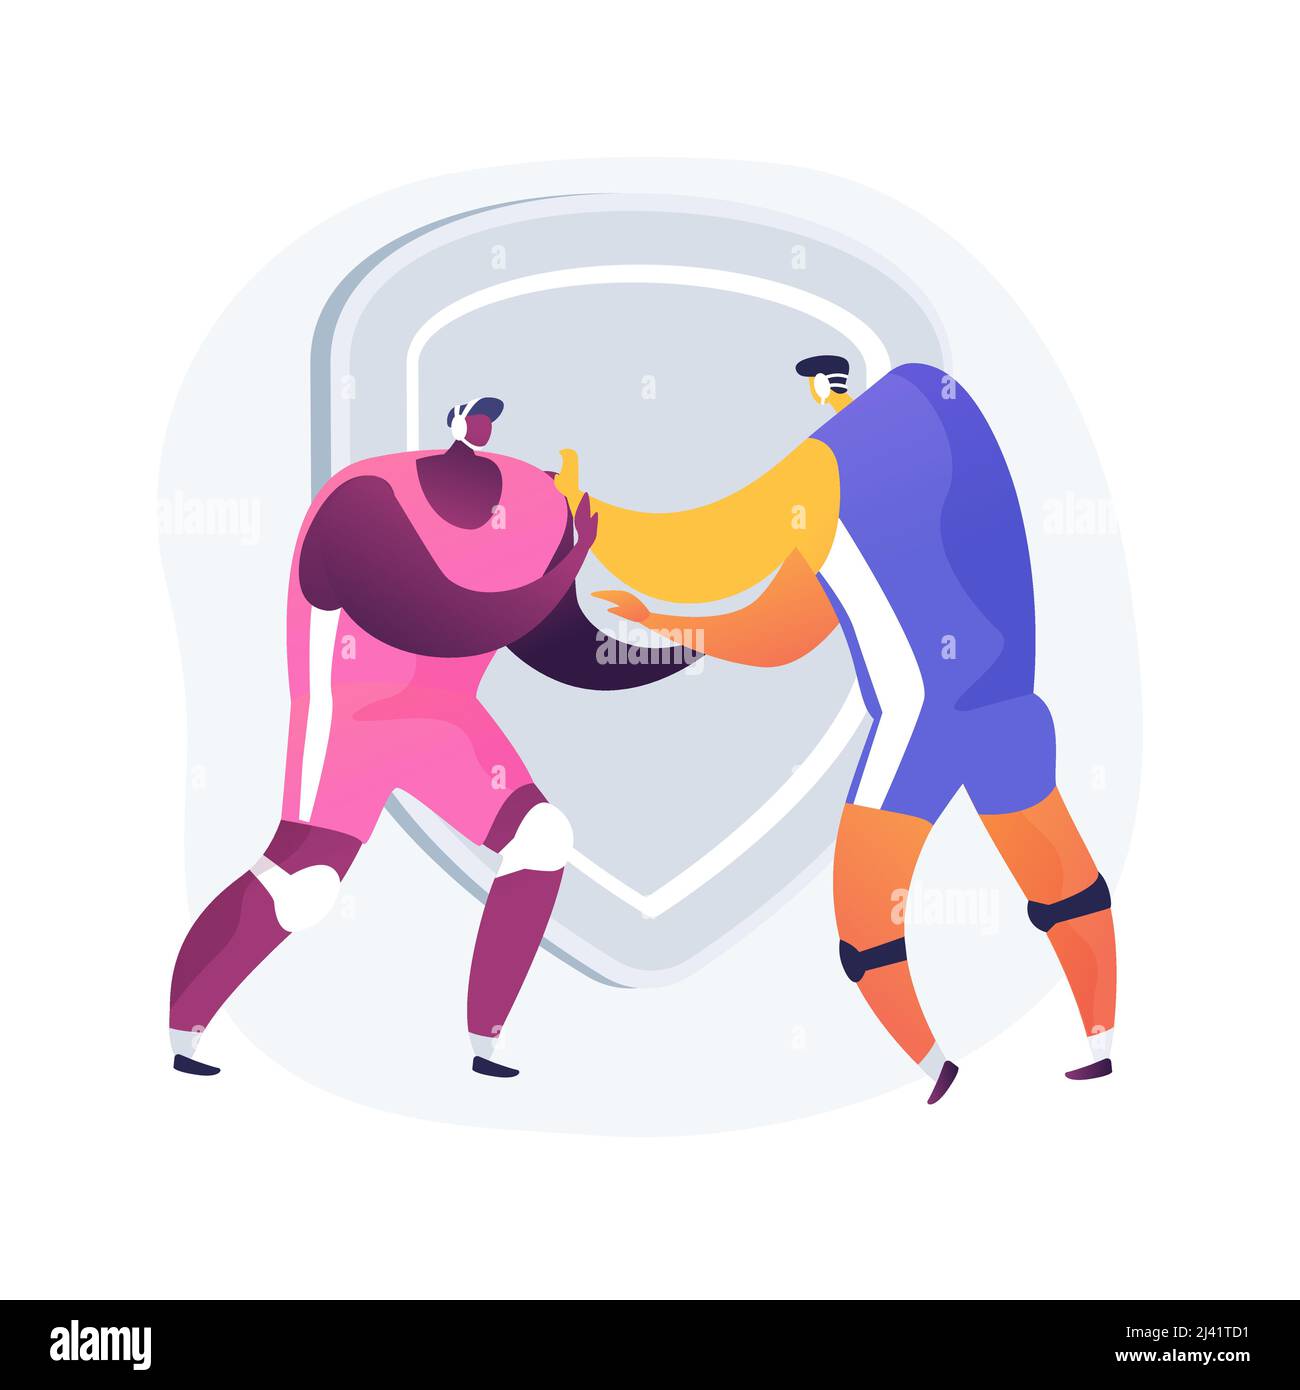 Wrestling abstract concept vector illustration. Pro training, buy equipment, wrestling gear, strong werestler, greco-roman, entertainment competition, Stock Vector